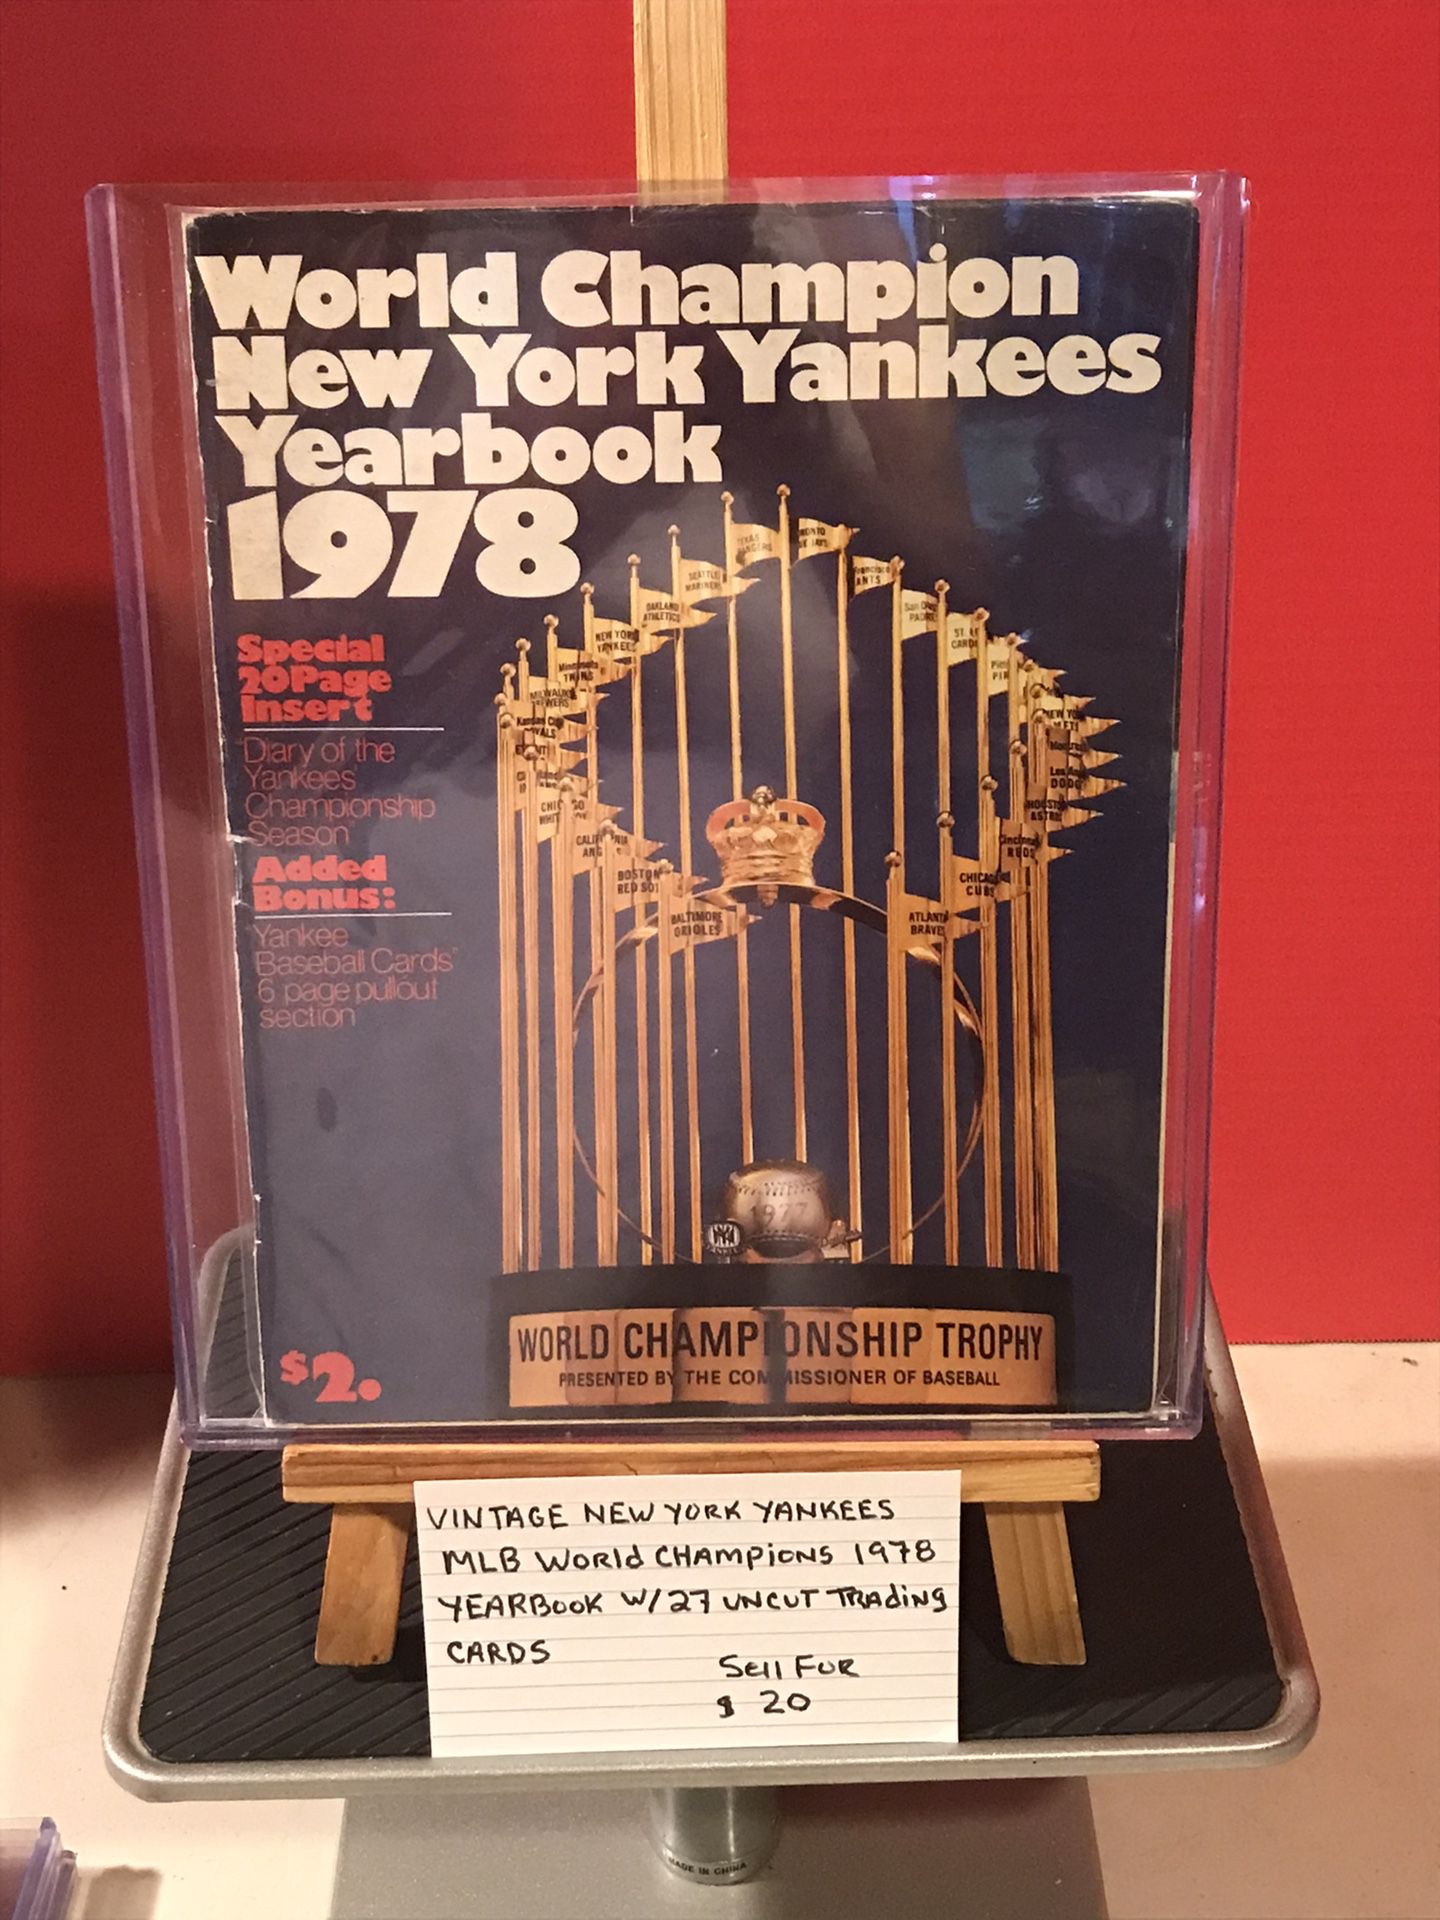 Vintage New York Yankees MLB world champions 1978 yearbook with 27 uncut trading cards inside